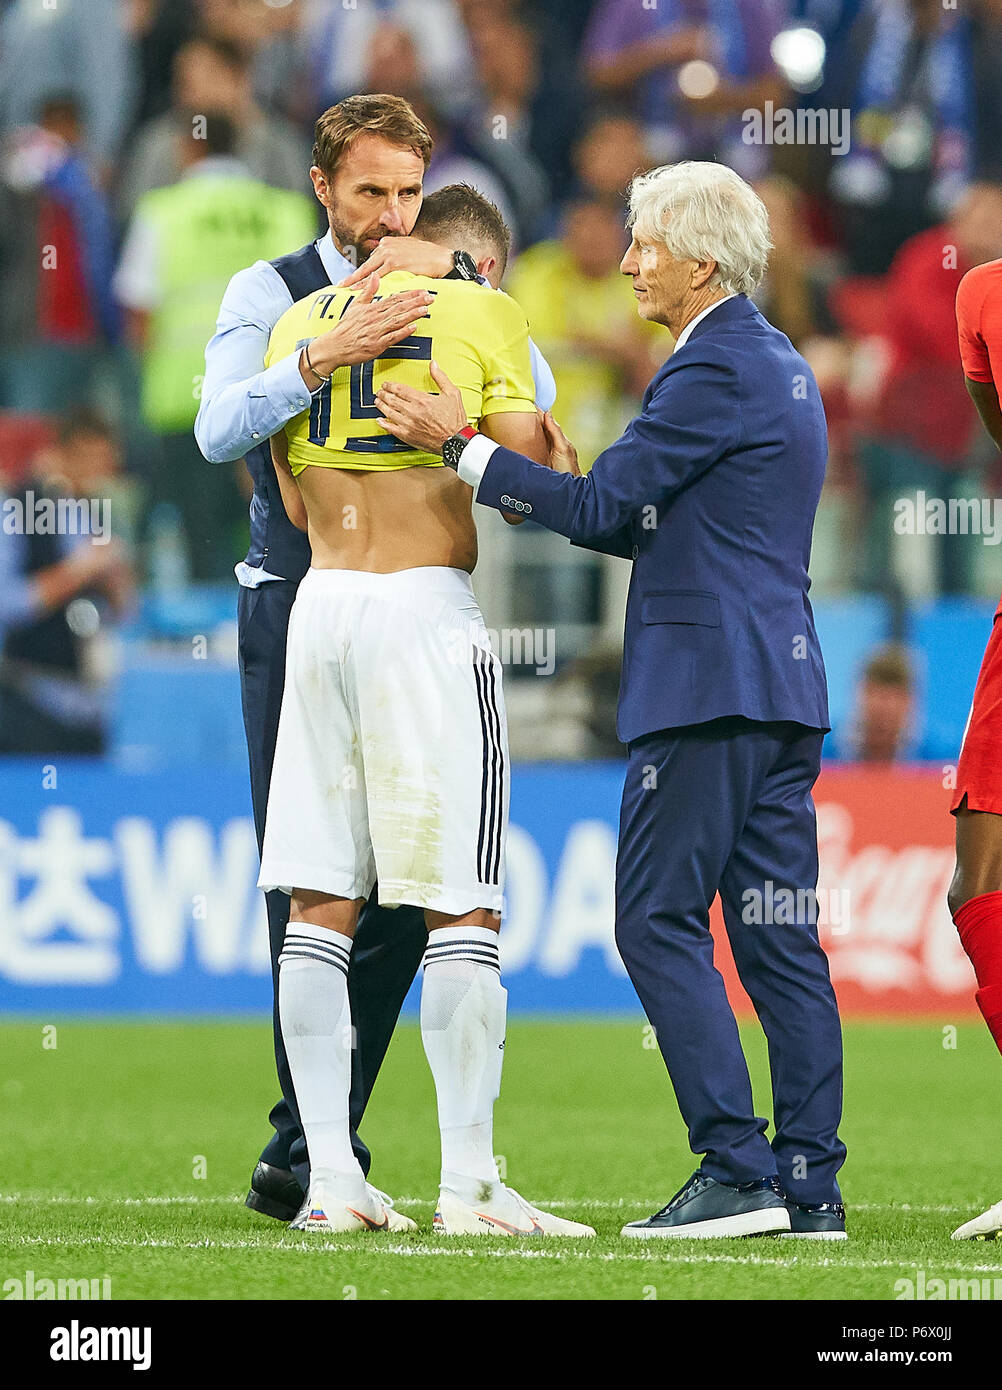 England- Columbia, Soccer, Moscow, July 03, 2018 Gareth Southgate, headcoach England, and Jose PEKERMAN, ARG, Columbia headcoach, comfort Mateus URIBE, Columbia Nr.15 sad, disappointed, angry, Emotions, disappointment, frustration, frustrated, sadness, desperate, despair,  ENGLAND - COLUMBIA FIFA WORLD CUP 2018 RUSSIA, Season 2018/2019,  July 03, 2018 S p a r t a k Stadium in Moscow, Russia. © Peter Schatz / Alamy Live News Stock Photo